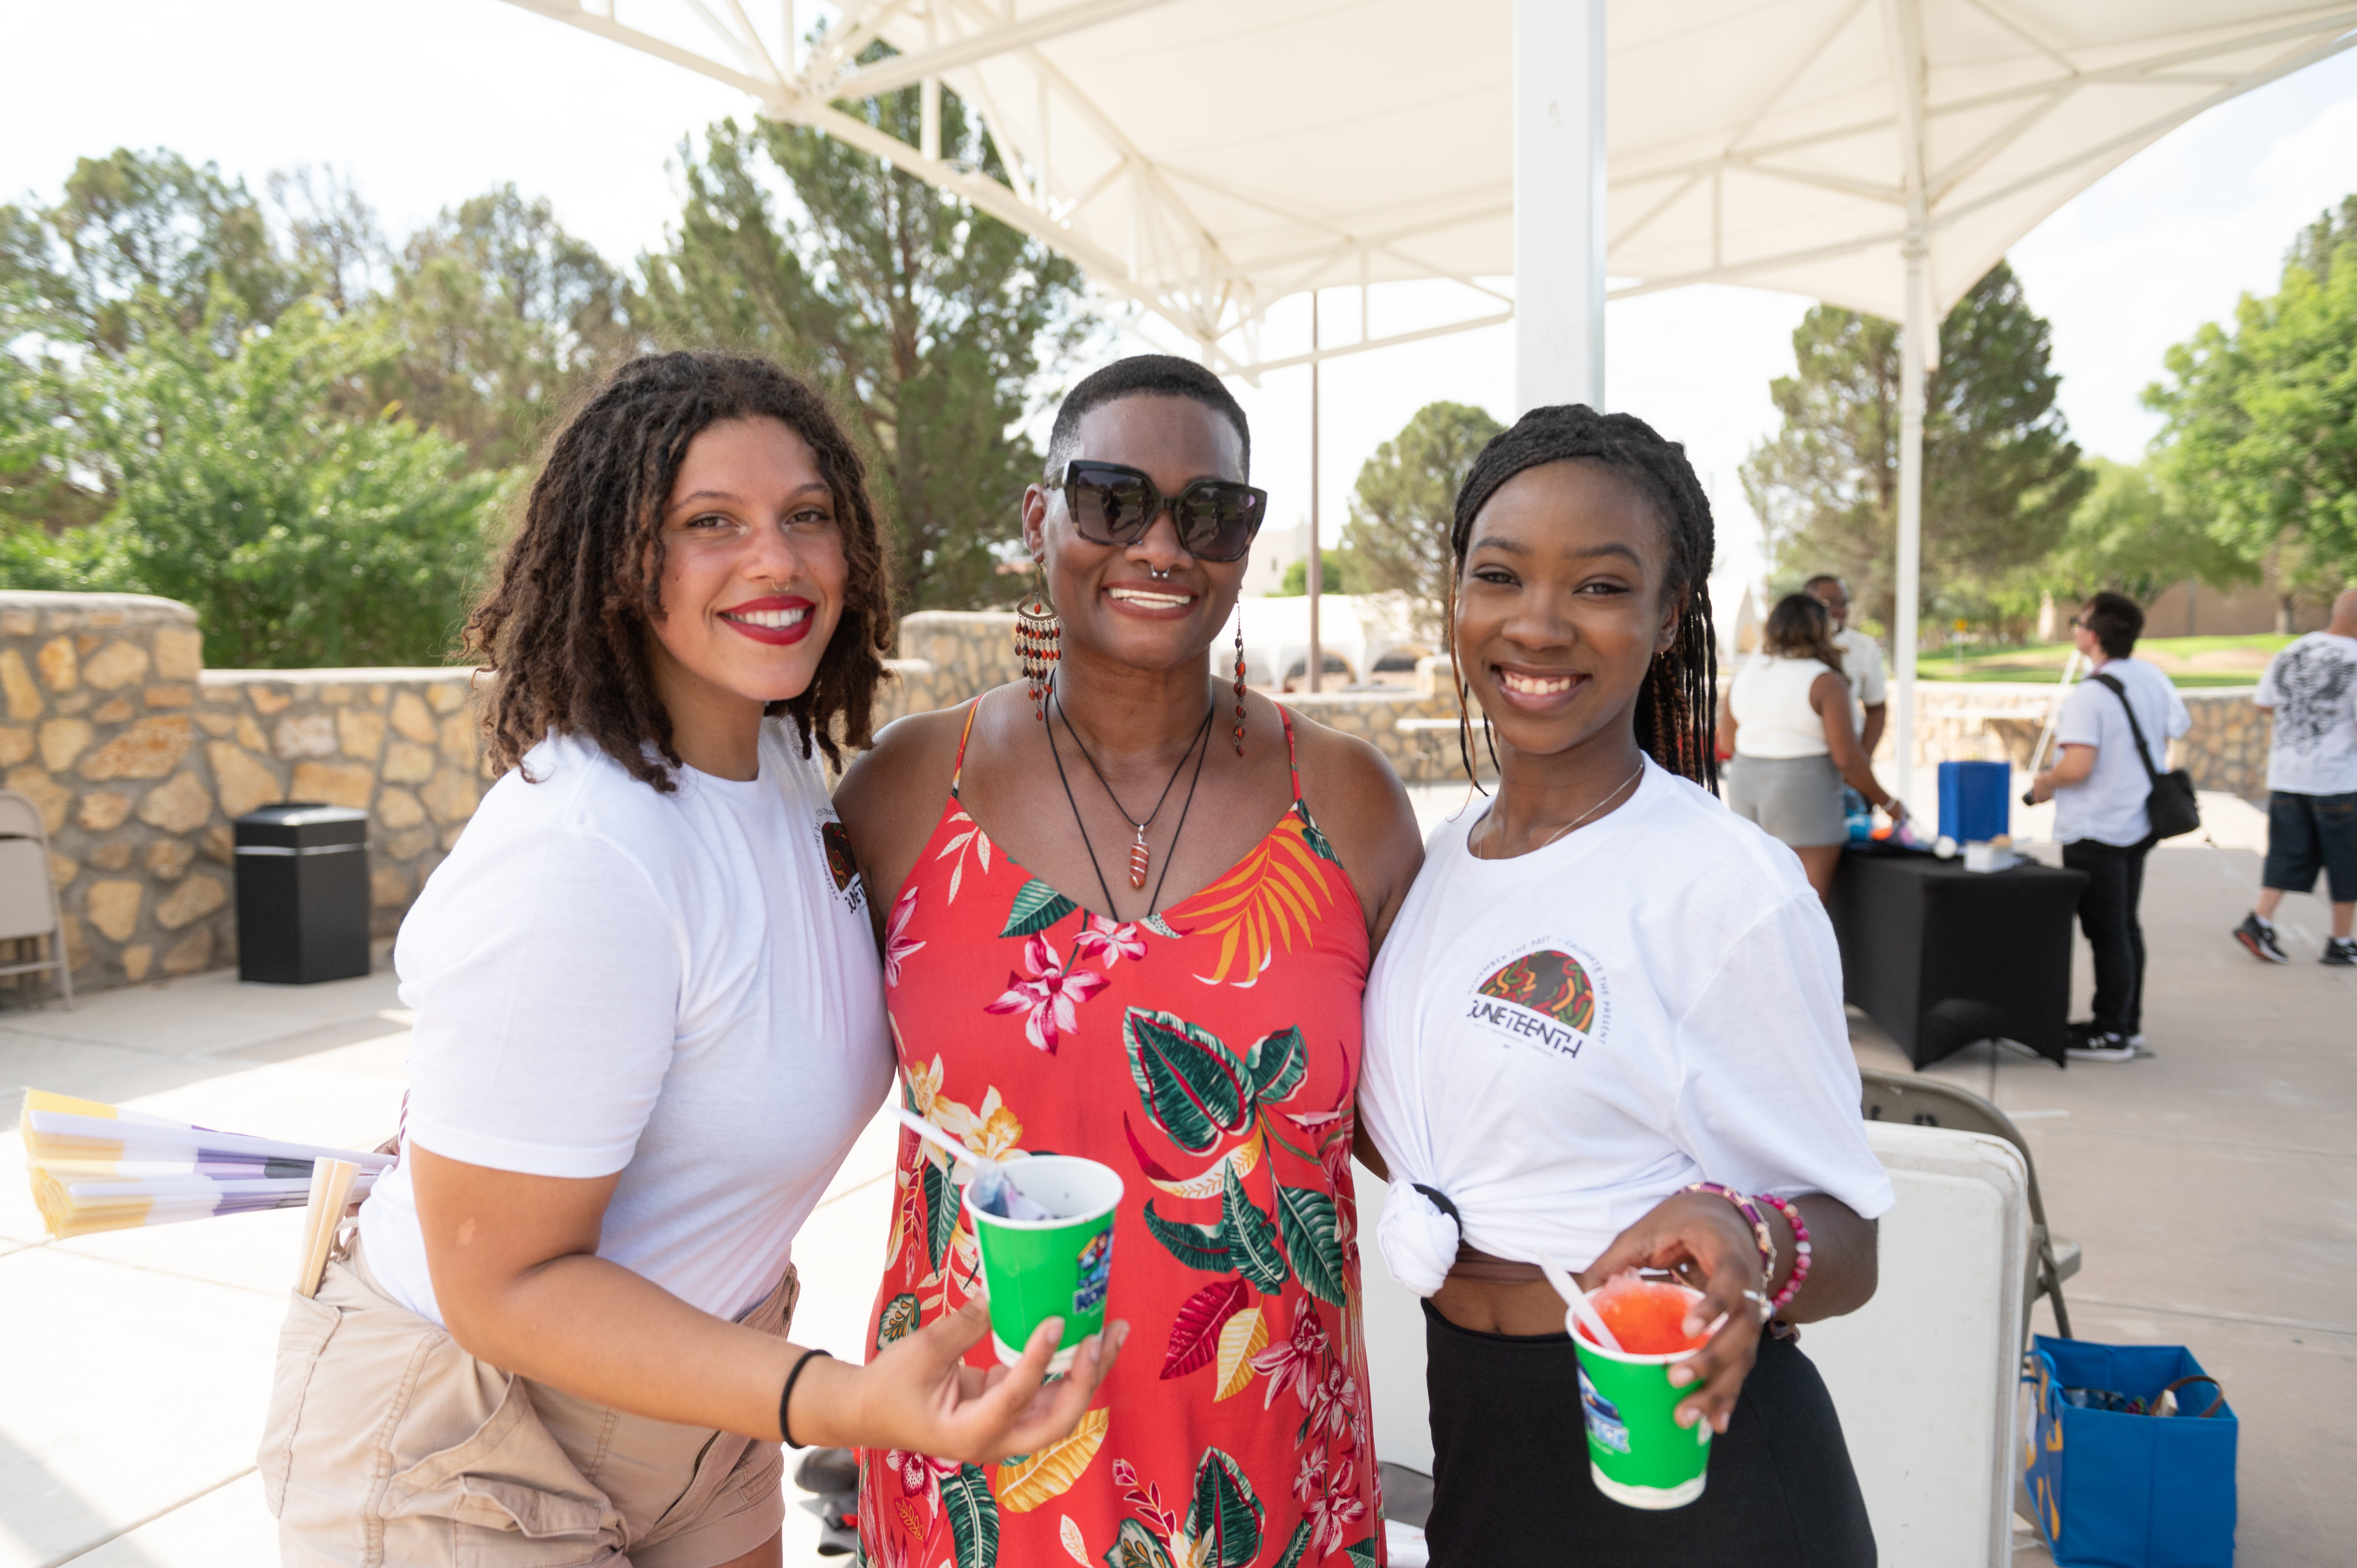 Picture from the celebration of Juneteenth, The image portrays three women standing closely together and smiling at the camera under a white canopy. The woman on the left has curly hair, is wearing a white T-shirt, khaki shorts, and holds a green cup with shaved ice. The woman in the middle has short hair, wears dark sunglasses, a red sleeveless dress with a colorful leaf pattern, and is also holding a green cup with shaved ice. The woman on the right has long braided hair, is wearing a white T-shirt with a visible logo and the word "JUNETEENTH," and is holding a green cup with a colorful drink. Behind them, there is an outdoor area with trees, a stone wall, and several people in the background.